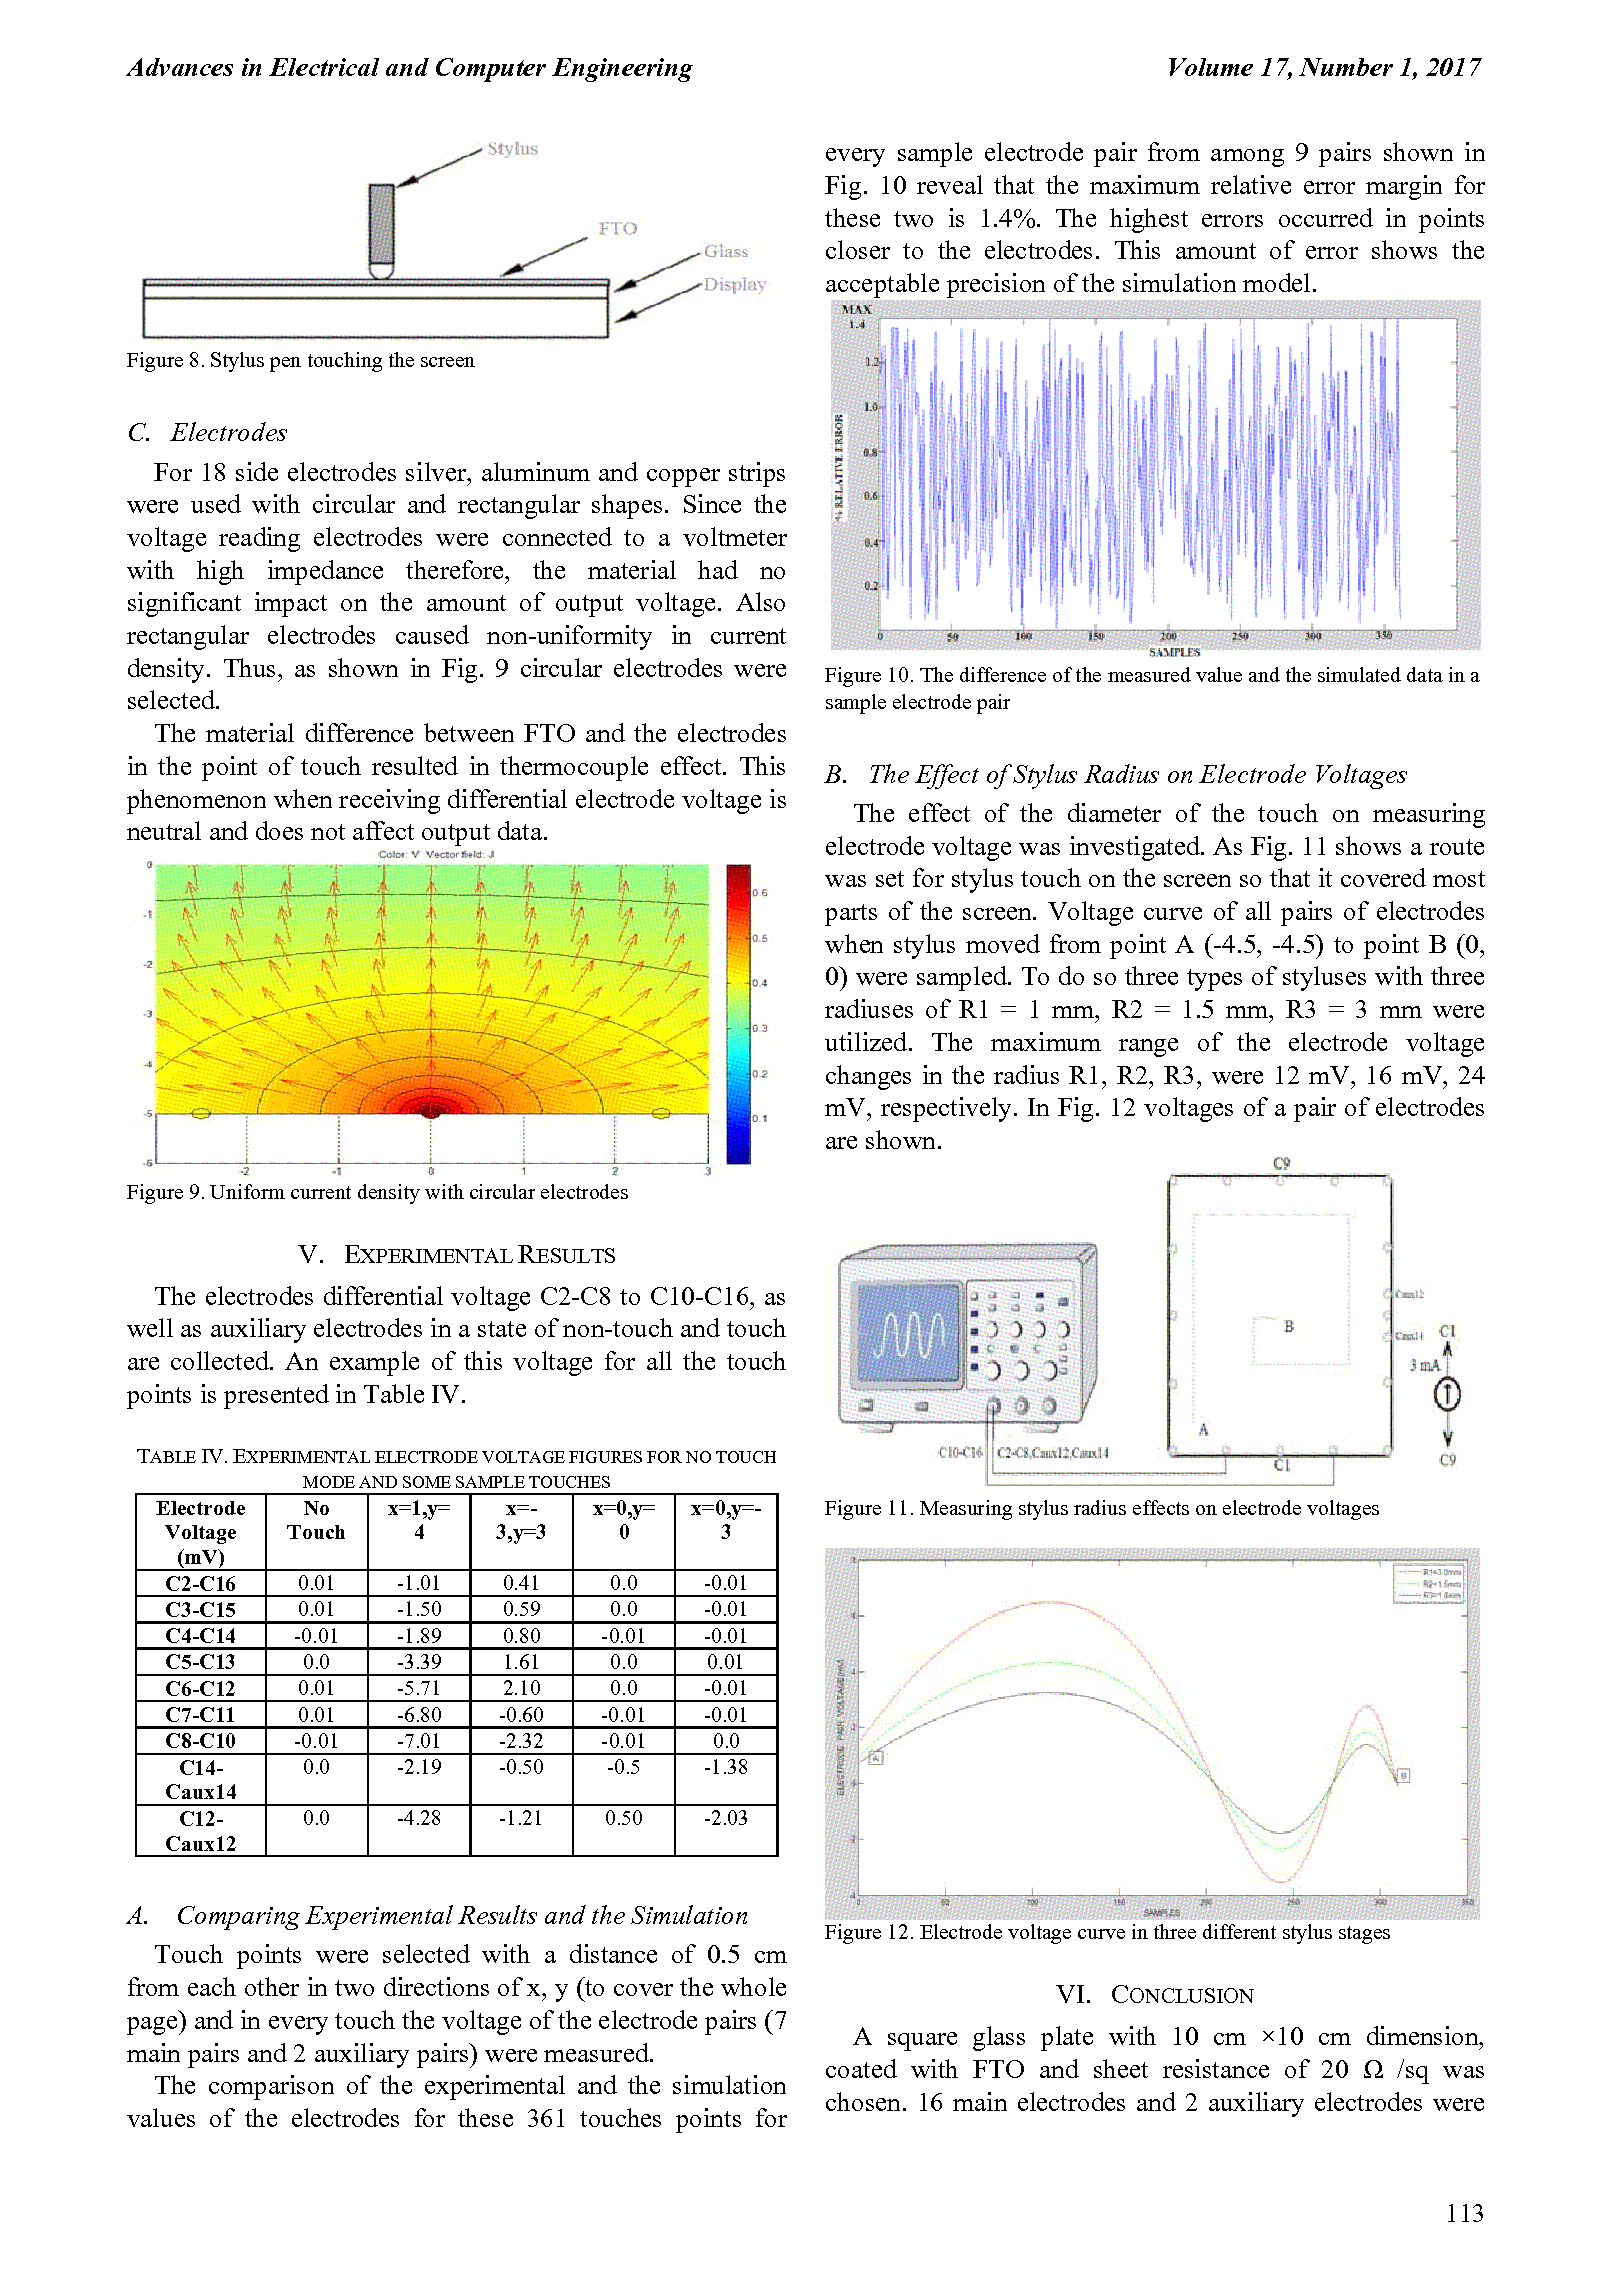 PDF Quickview for paper with DOI:10.4316/AECE.2017.01016